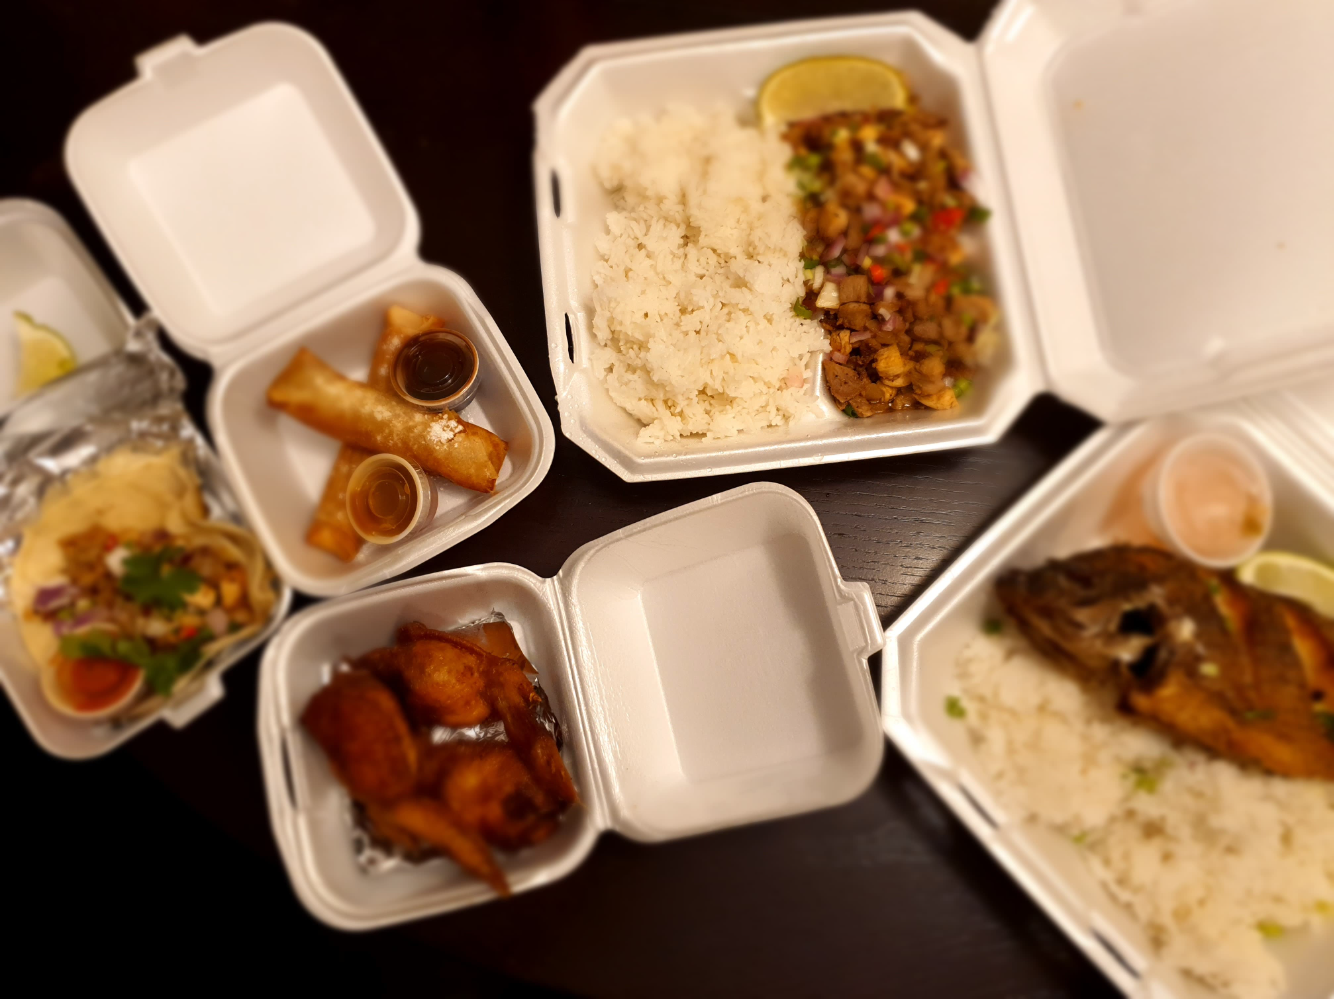 An overhead image of takeout from A Taste of Both Worlds with all the food in a variety of sizes of Styrofoam containers. Photo by Da Yeon Eom.